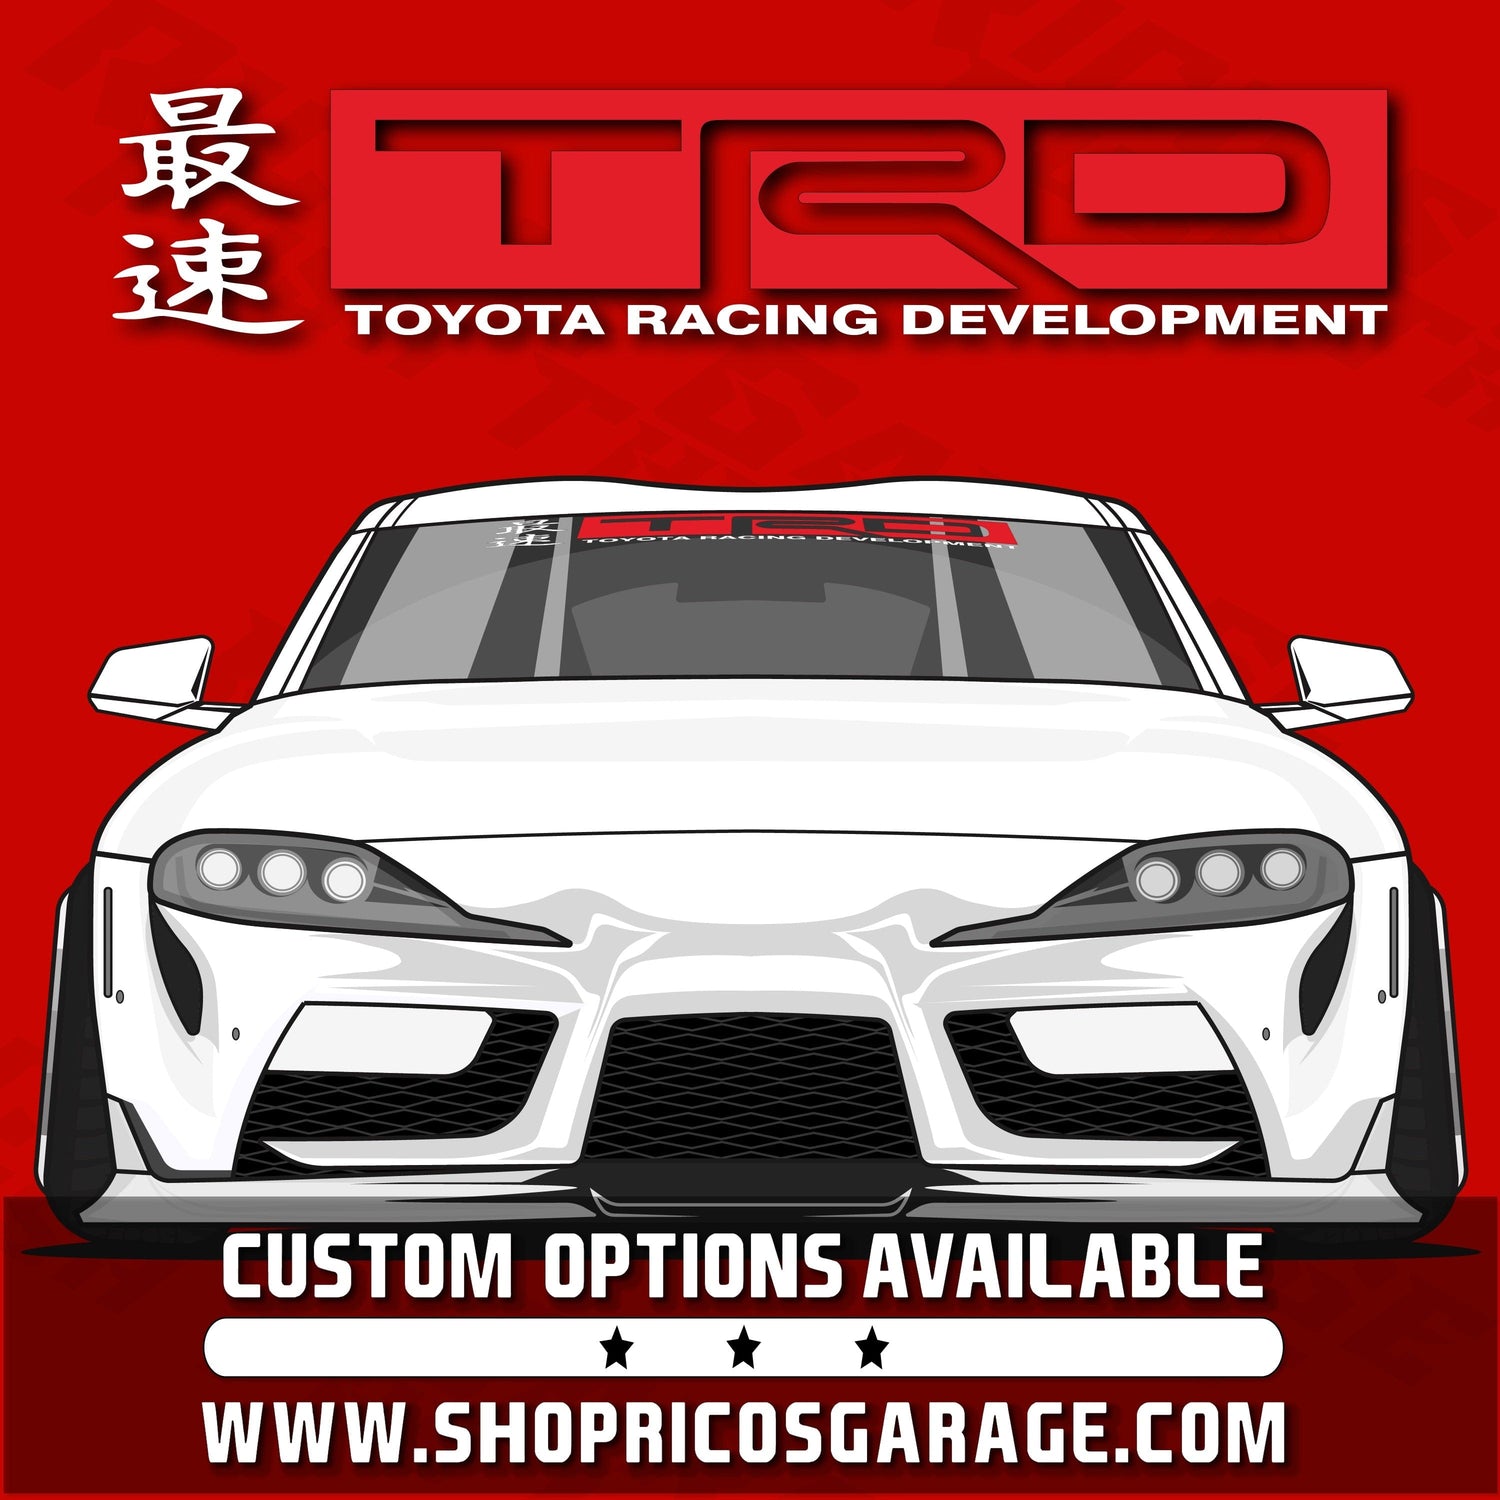 Toyota TRD Windshield Banner Decal - Japanese Text - Rico's Garage